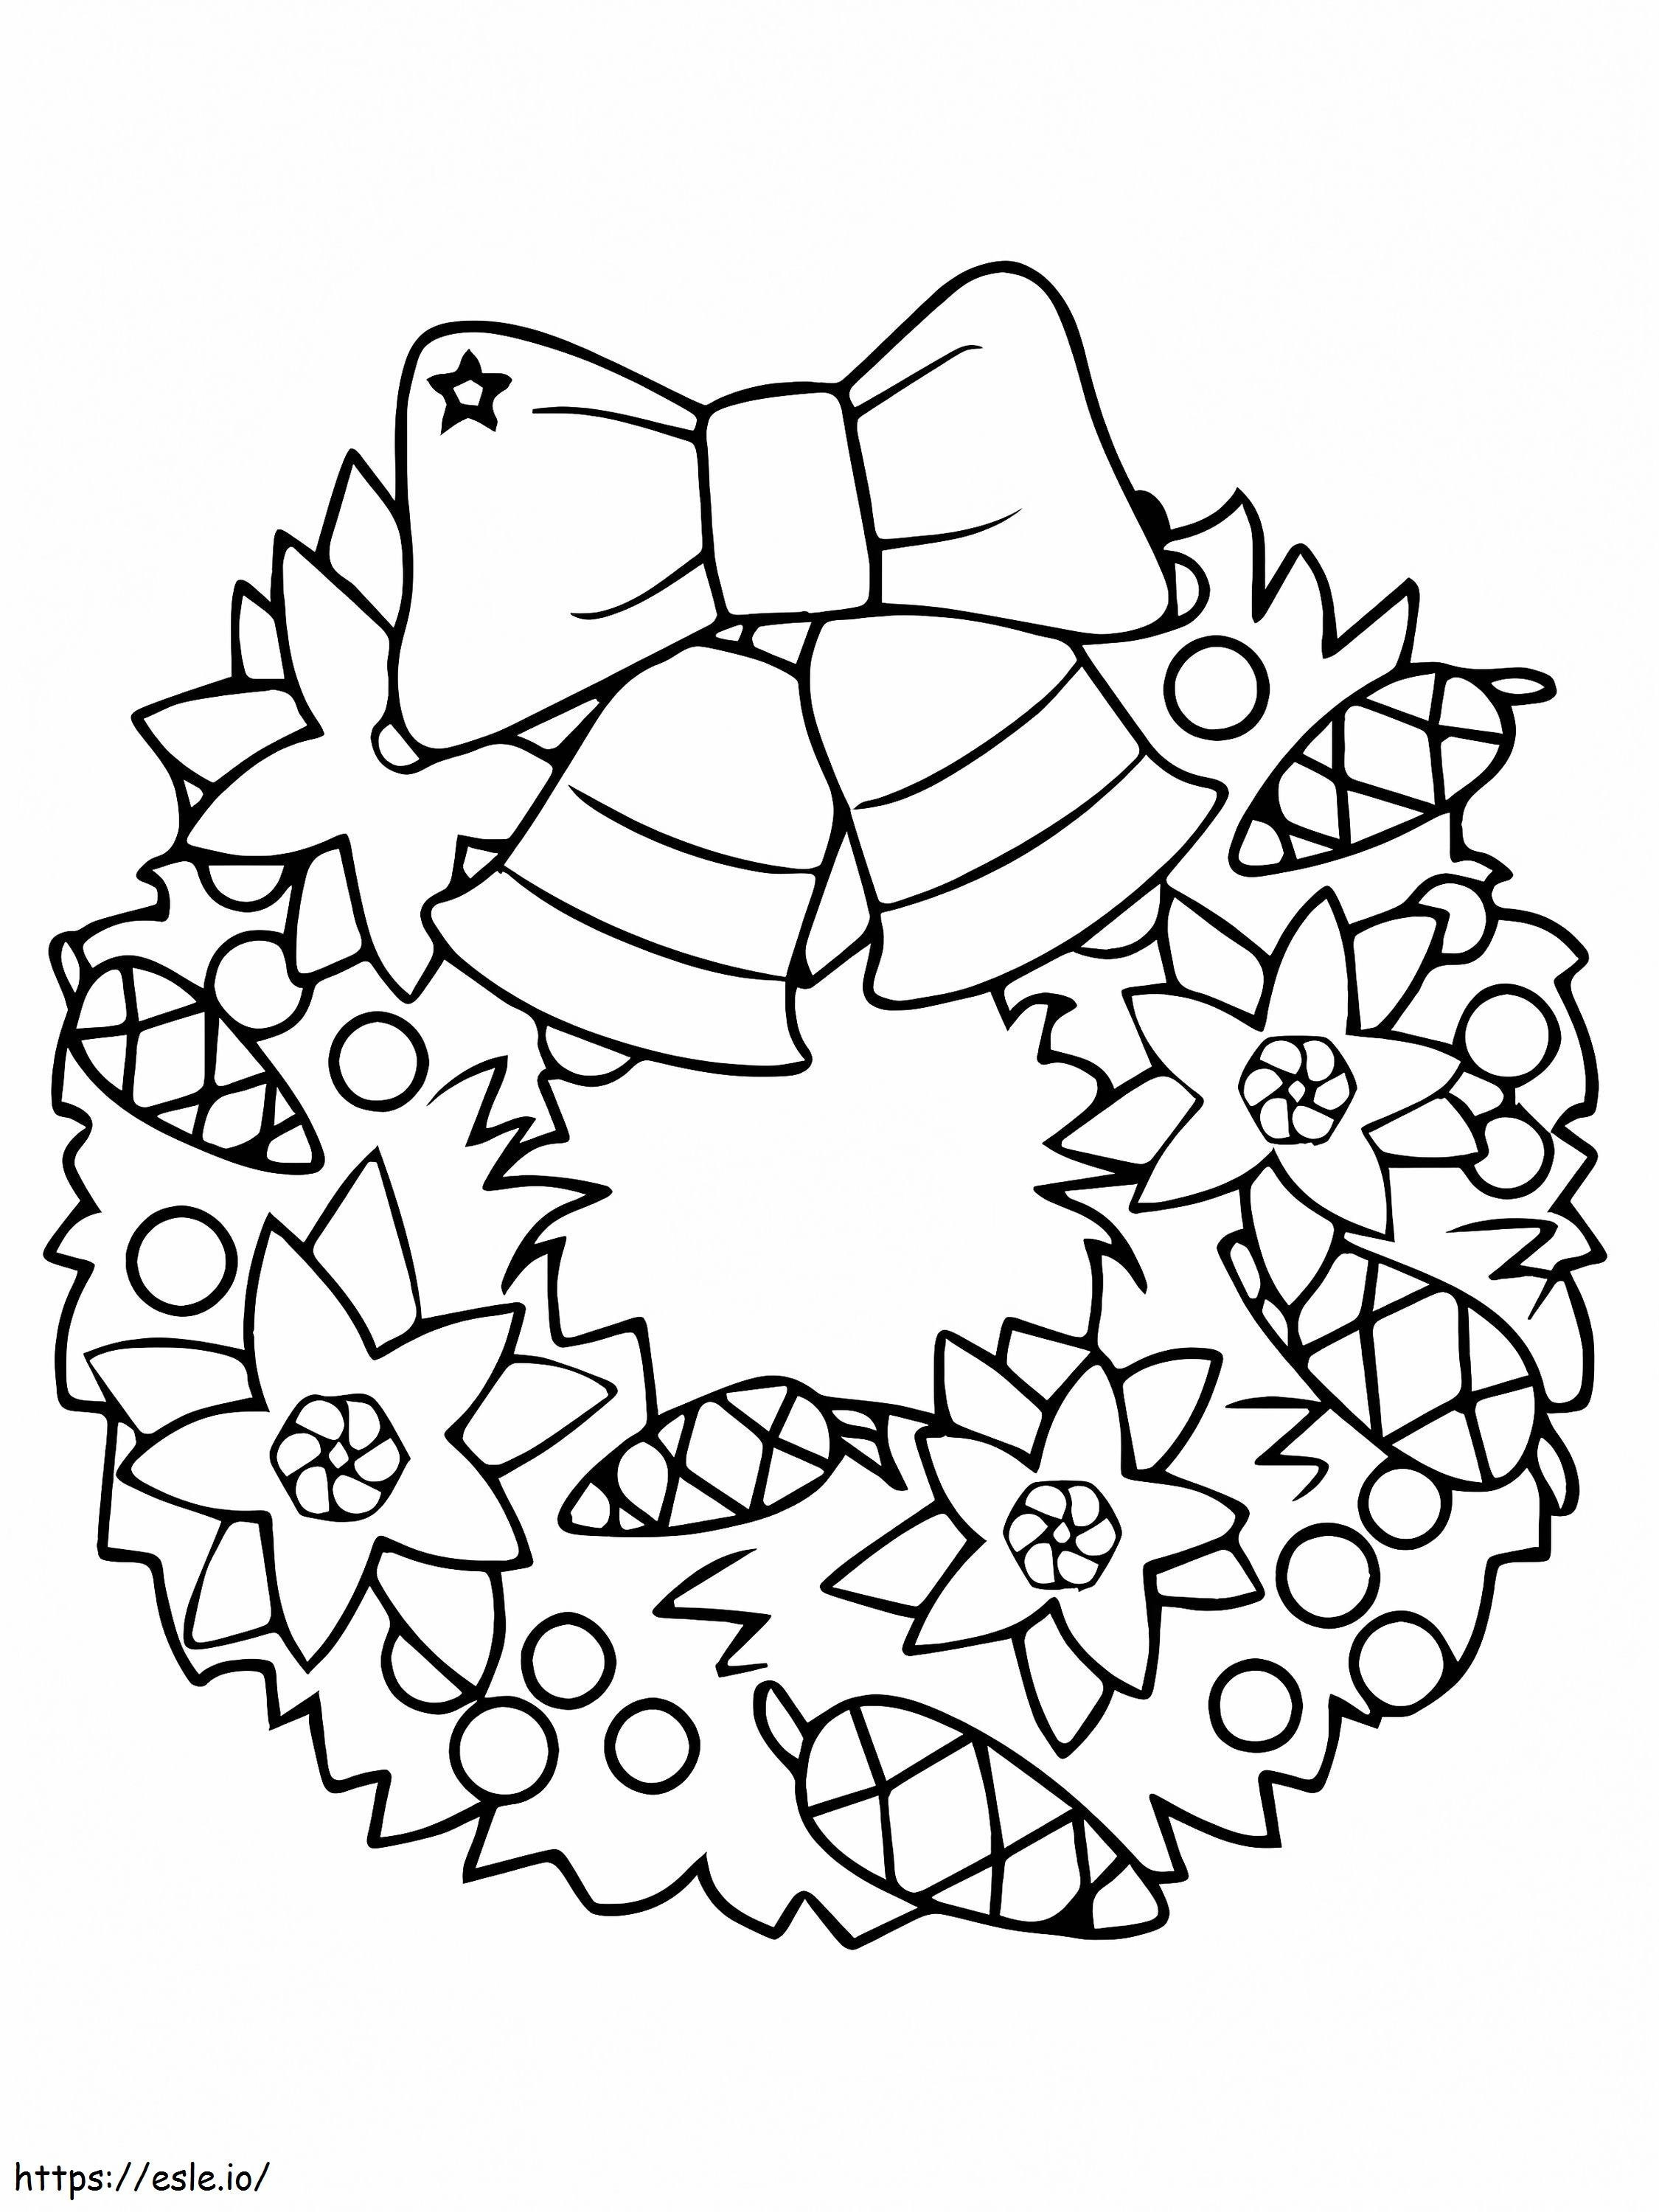 Exemplar Easter Wreath coloring page